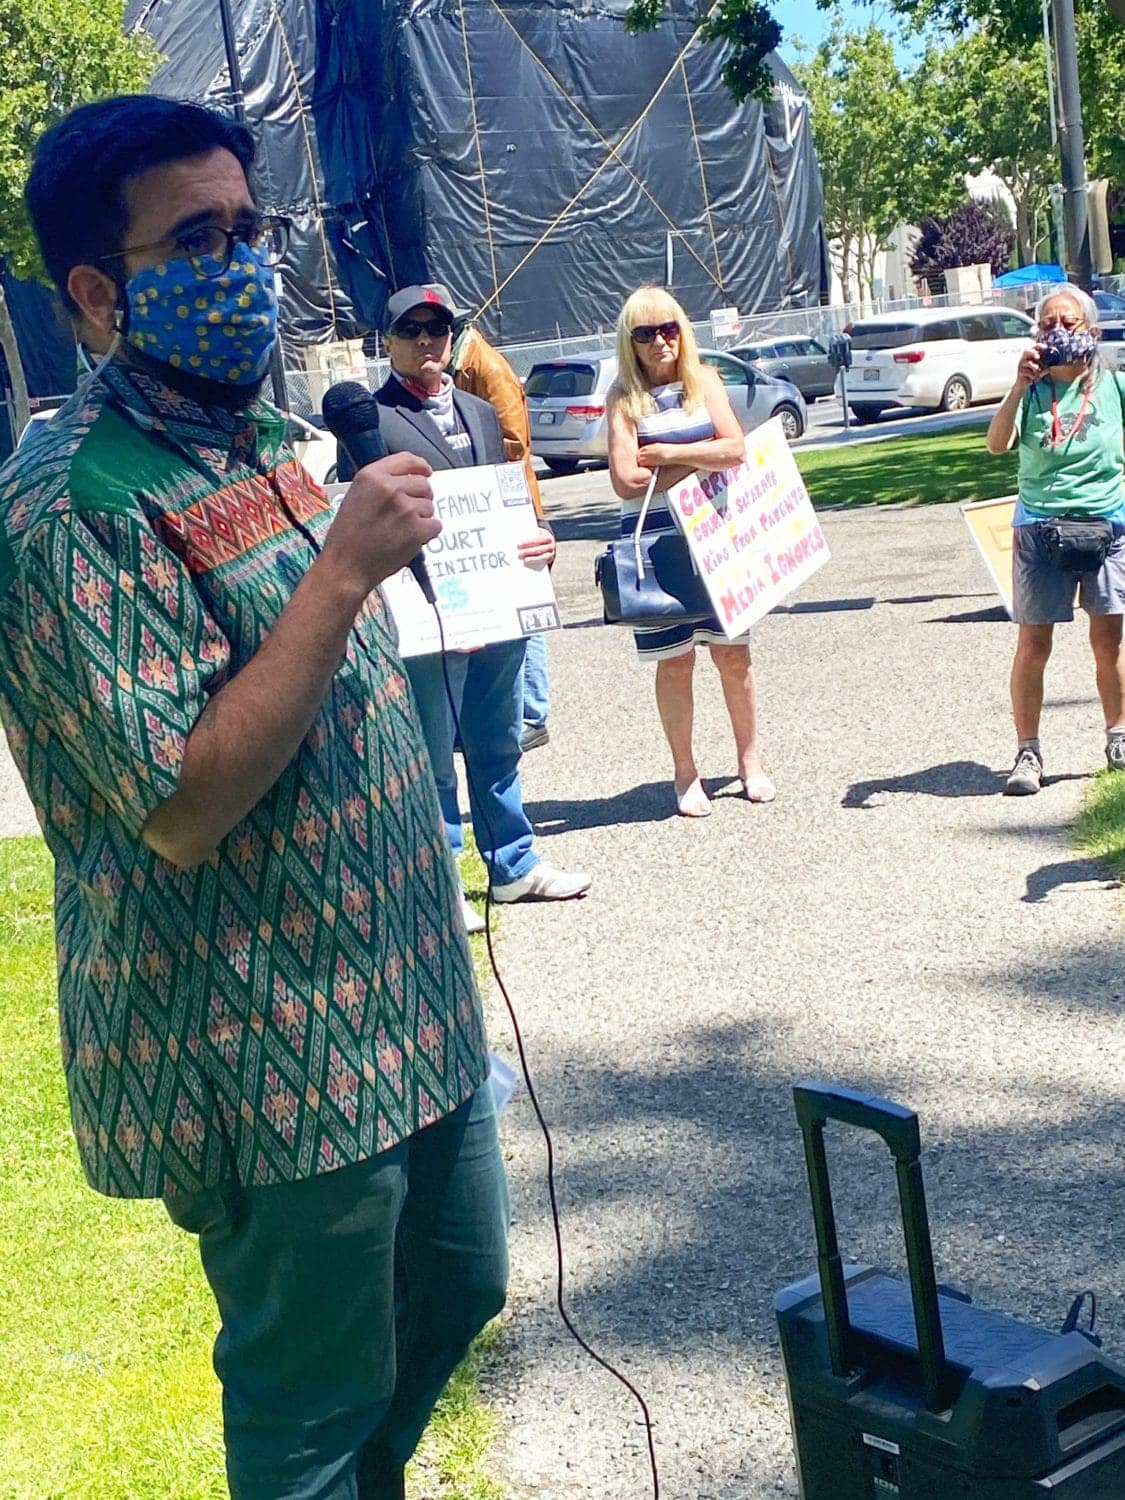 POOR-Magazine-poet-Jonathan-Gomez-at-POOR-Magazine-California-Families-Rise-protest-Santa-Clara-County-Justice-Center-051921-by-Tiny, Child Separation Services and the Family InJustice Court, Local News & Views 